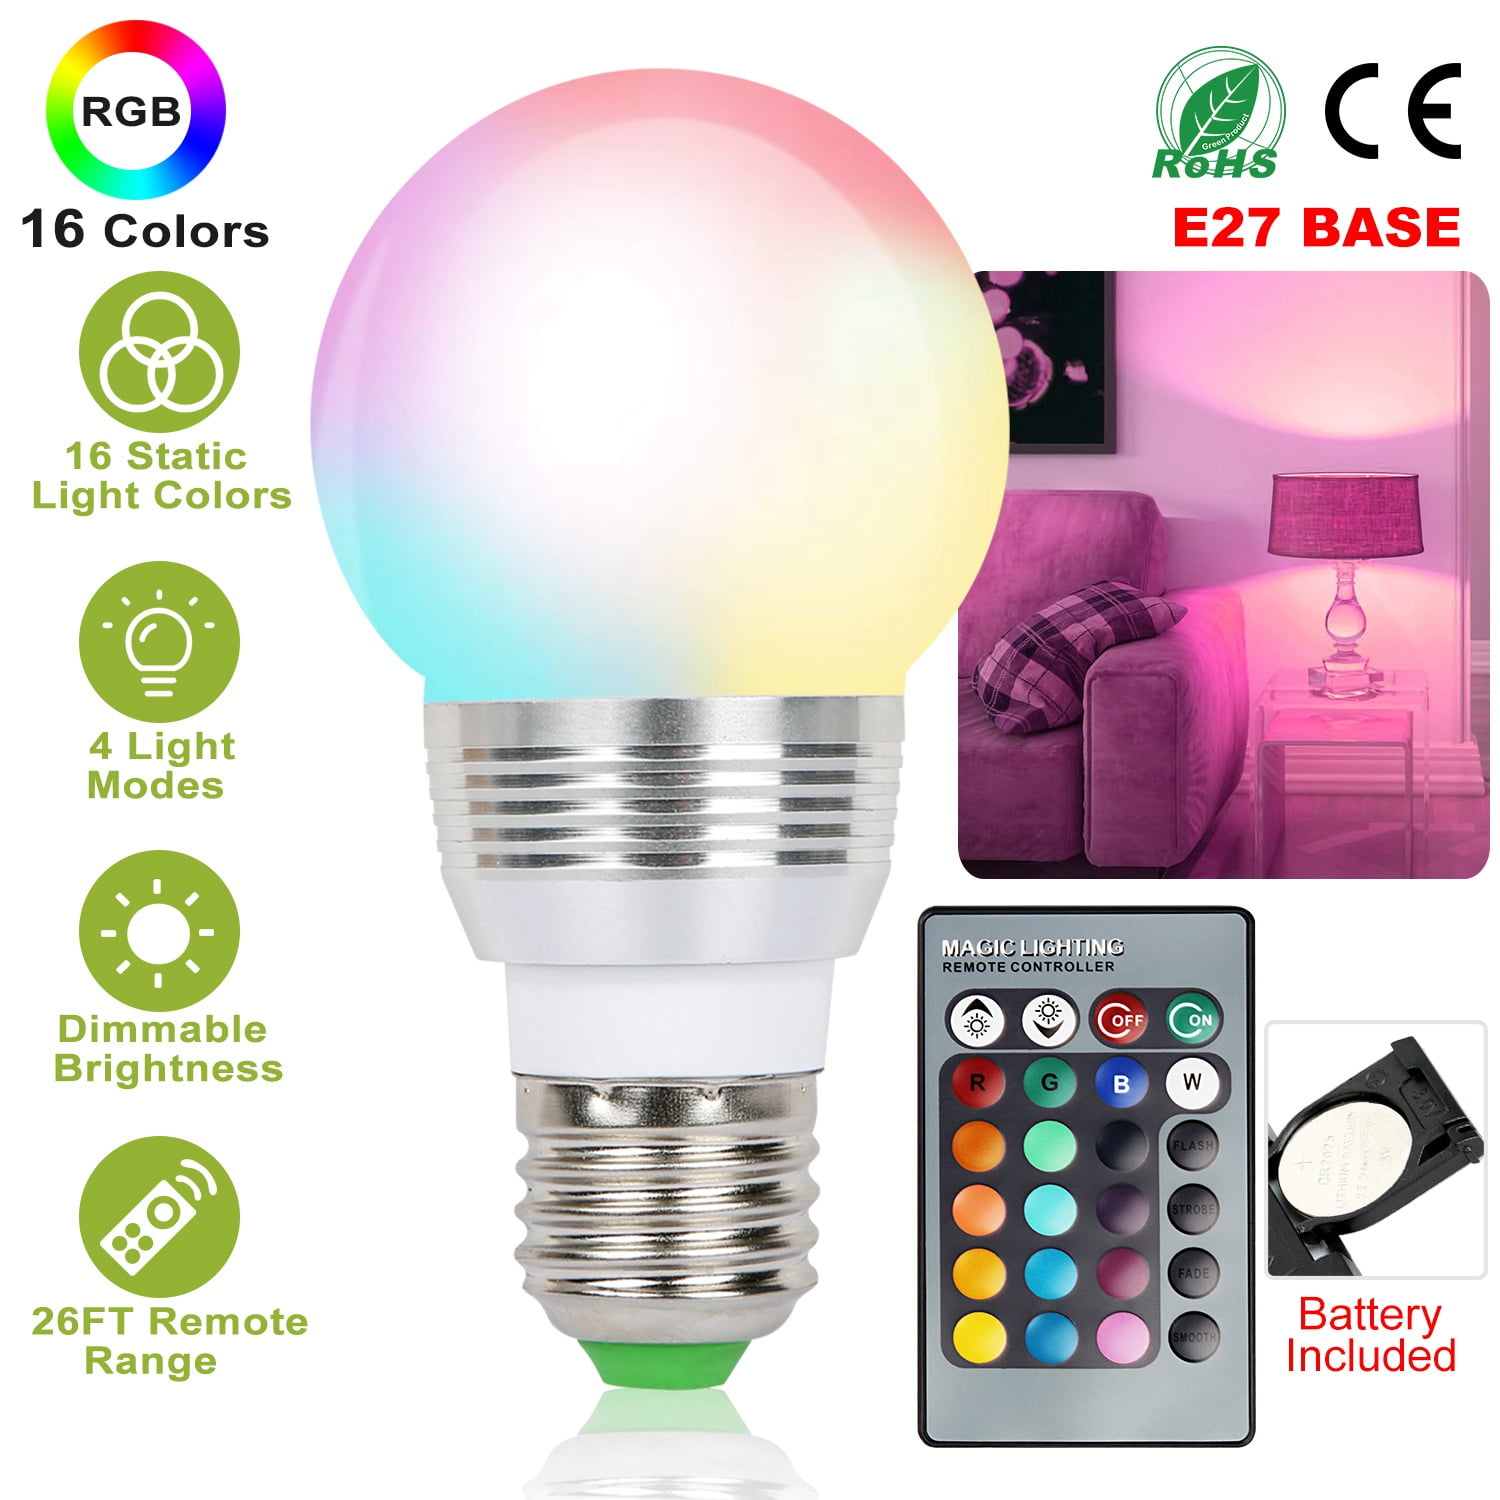 RGBW LED Bulb Light 16 Color Changing E27 Lamp IR Remote Controller Wholesale 